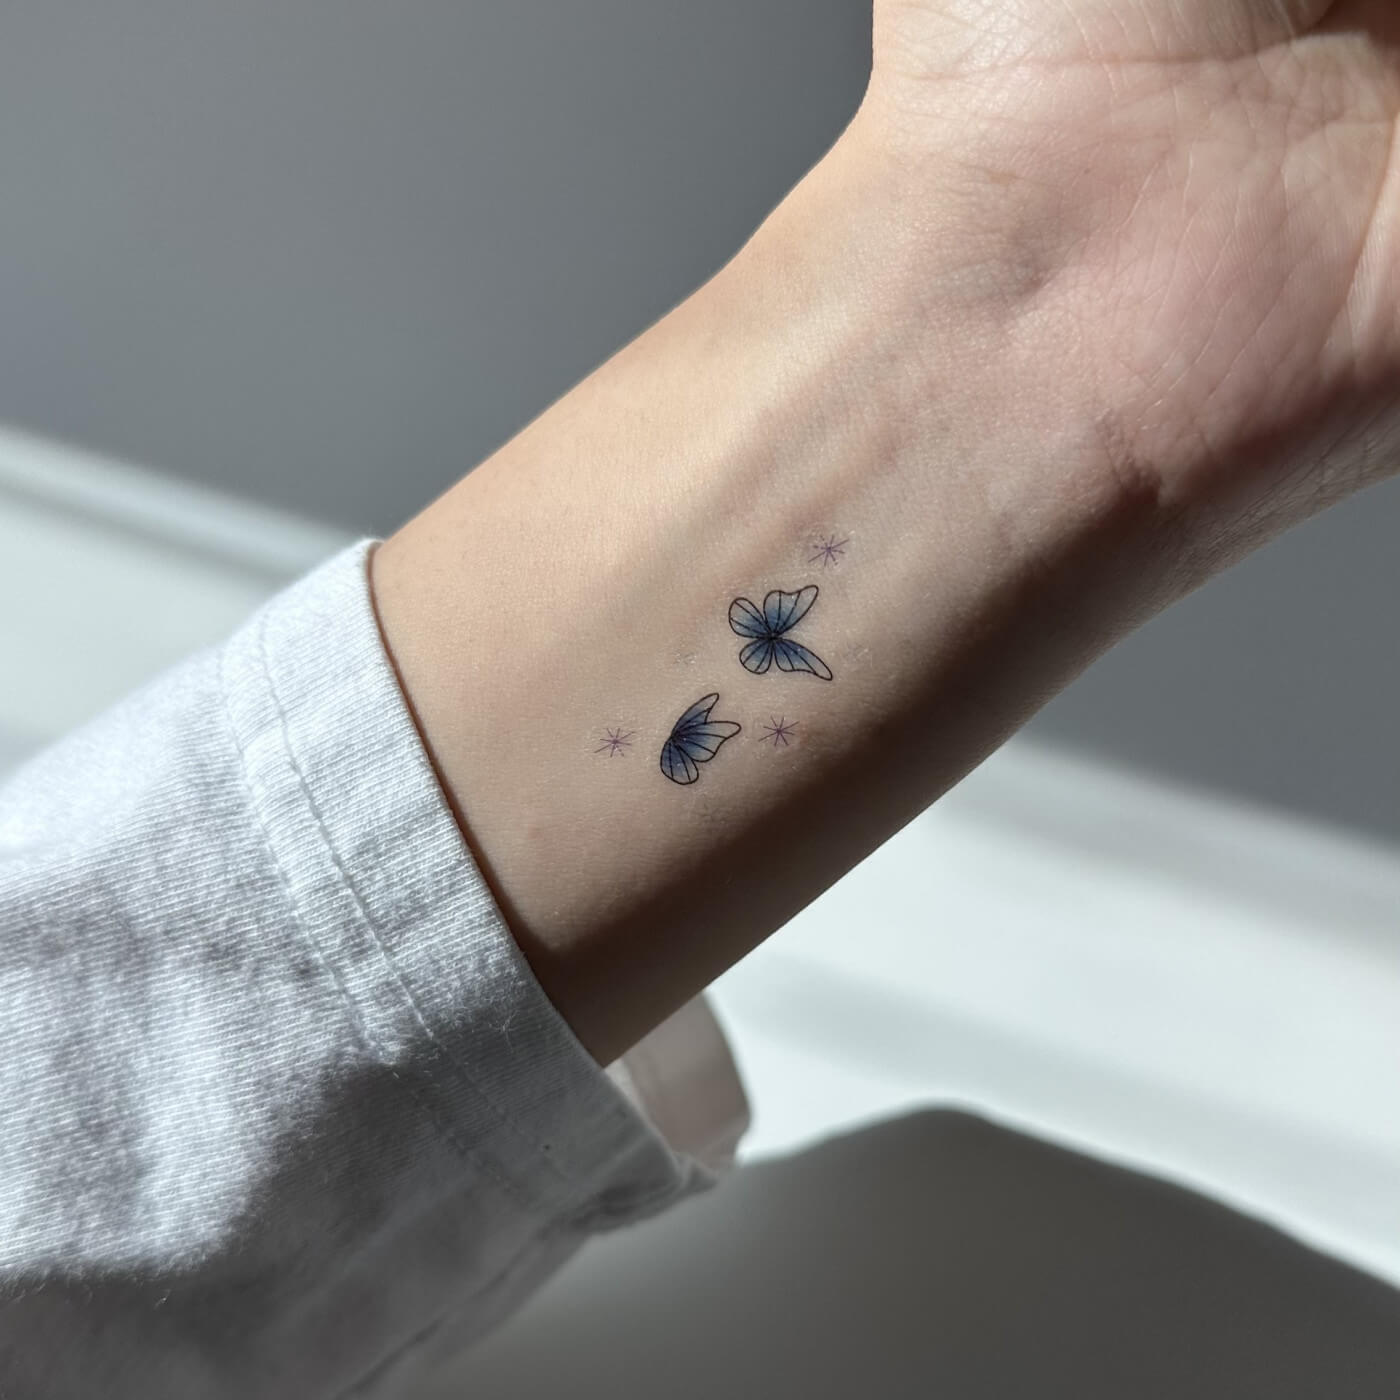 Why are tattoos illegal in South Korea? The beginning of the temporary tattoo trend